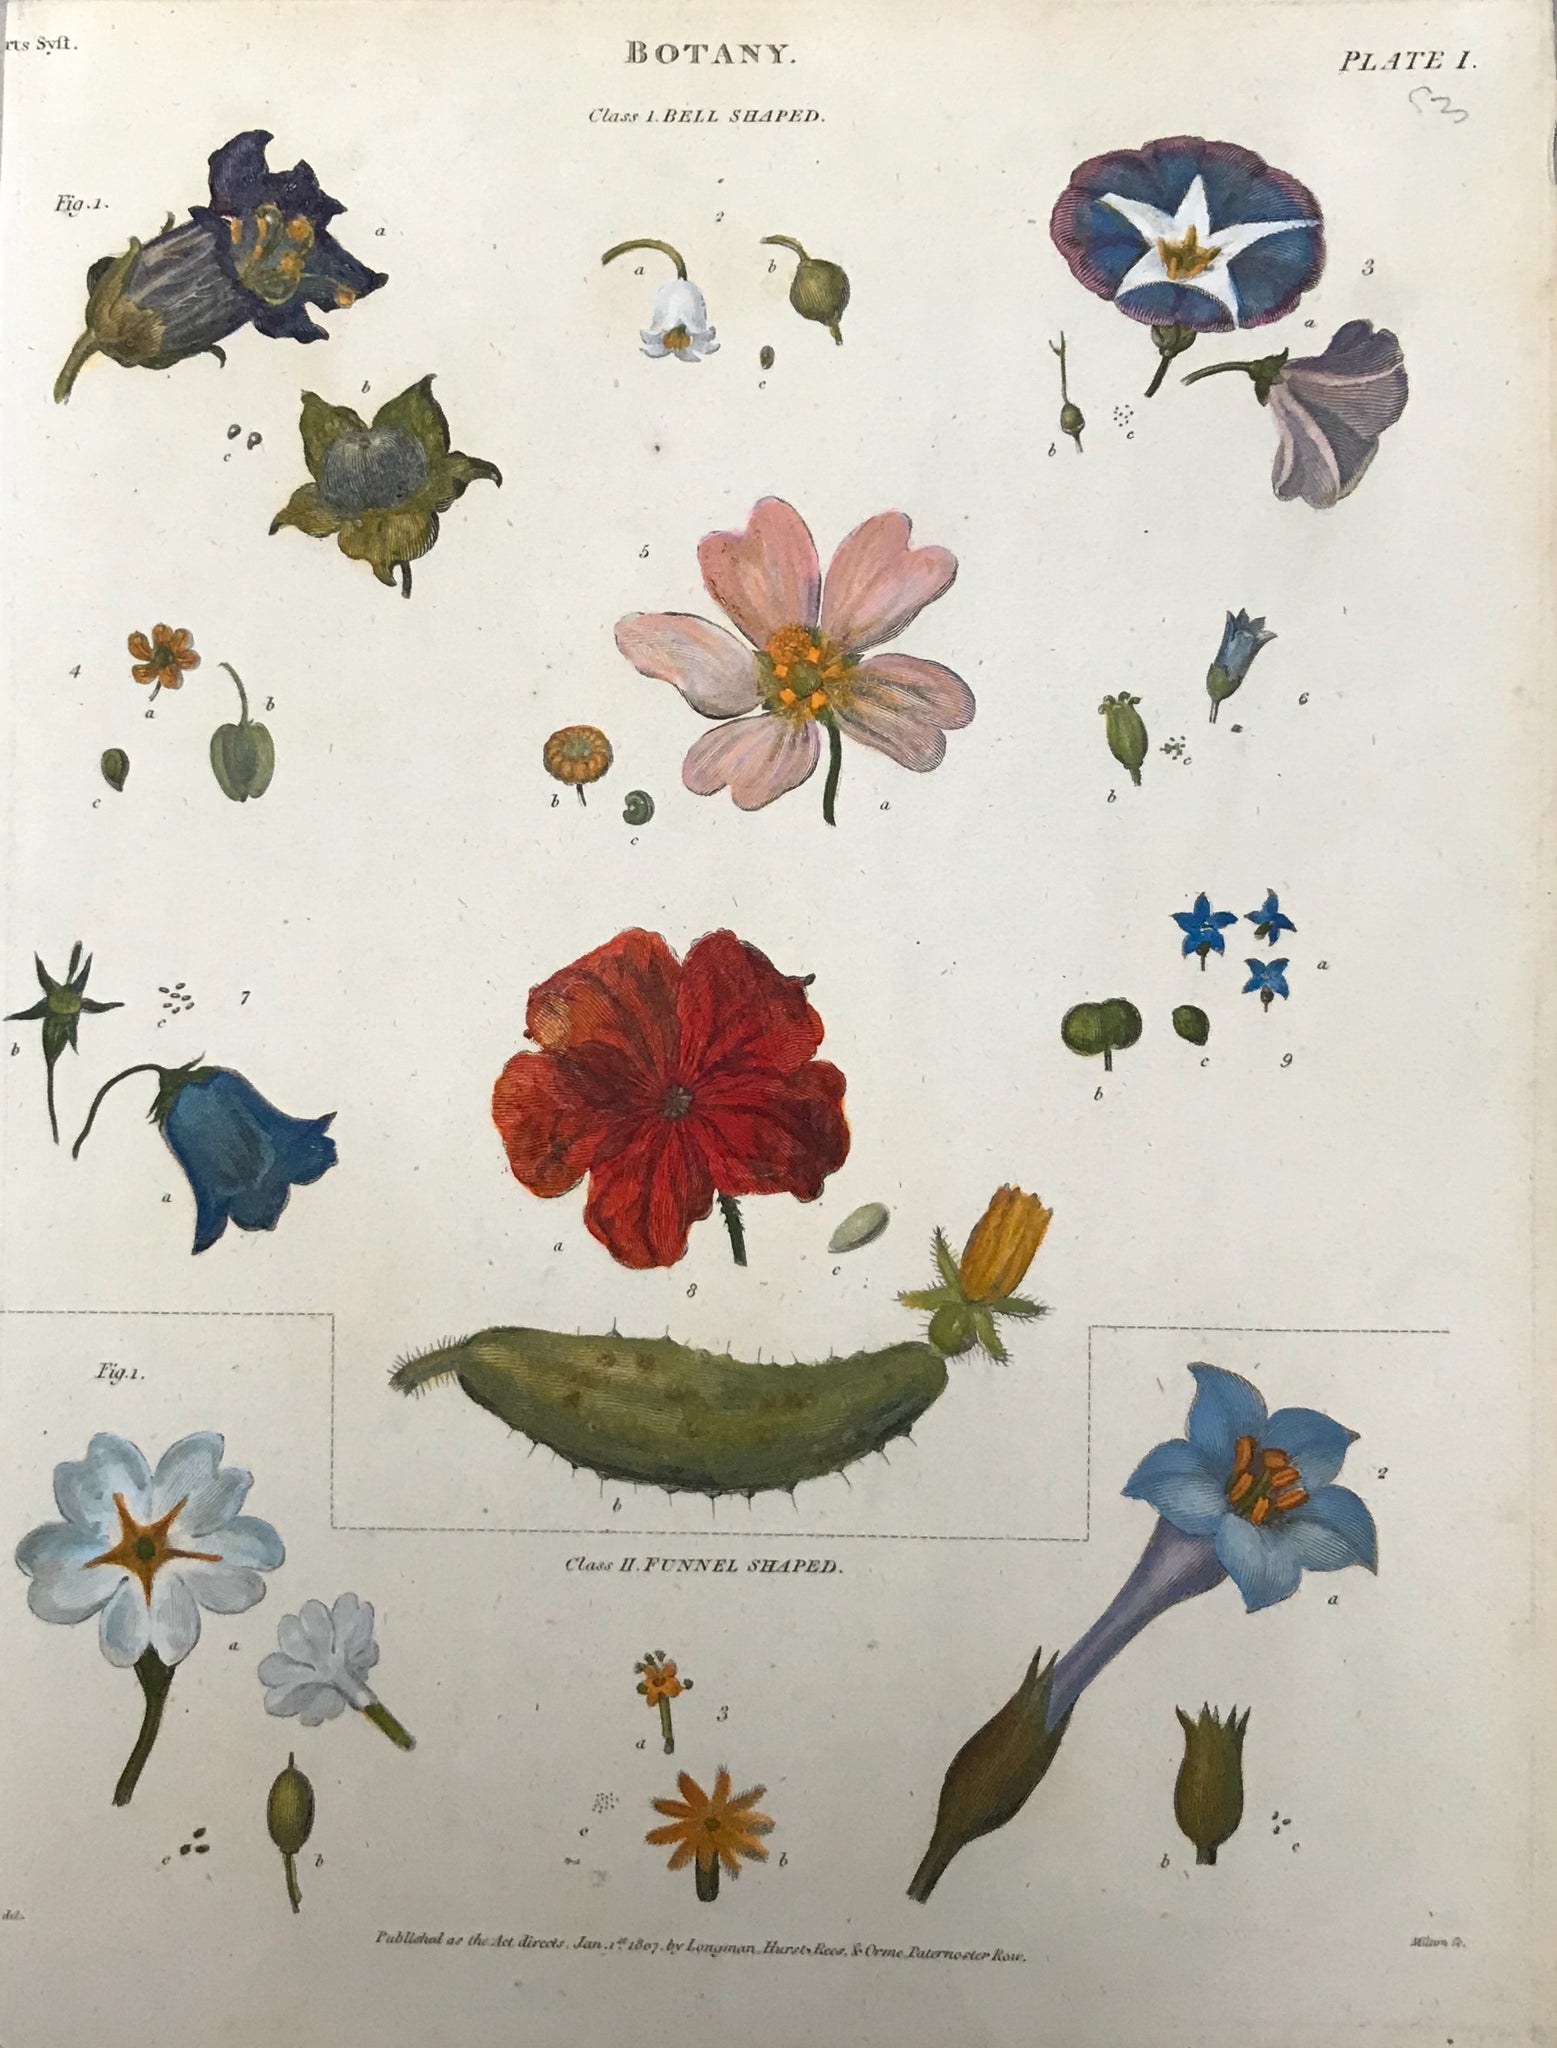 The upper part of this print is titled " Bell Shaped" and shows blooms such as campanula, morning glory and a cucumber blossom. The bottom is titeled "Funnel Shaped".     Bits and pieces of "Botany"  The individual parts of flowers and plants strewn loosely over a page in a very decorative manner.  Copperplate etchings in very attractive recent hand colouring.  Most were drawn by Syd Edwards.